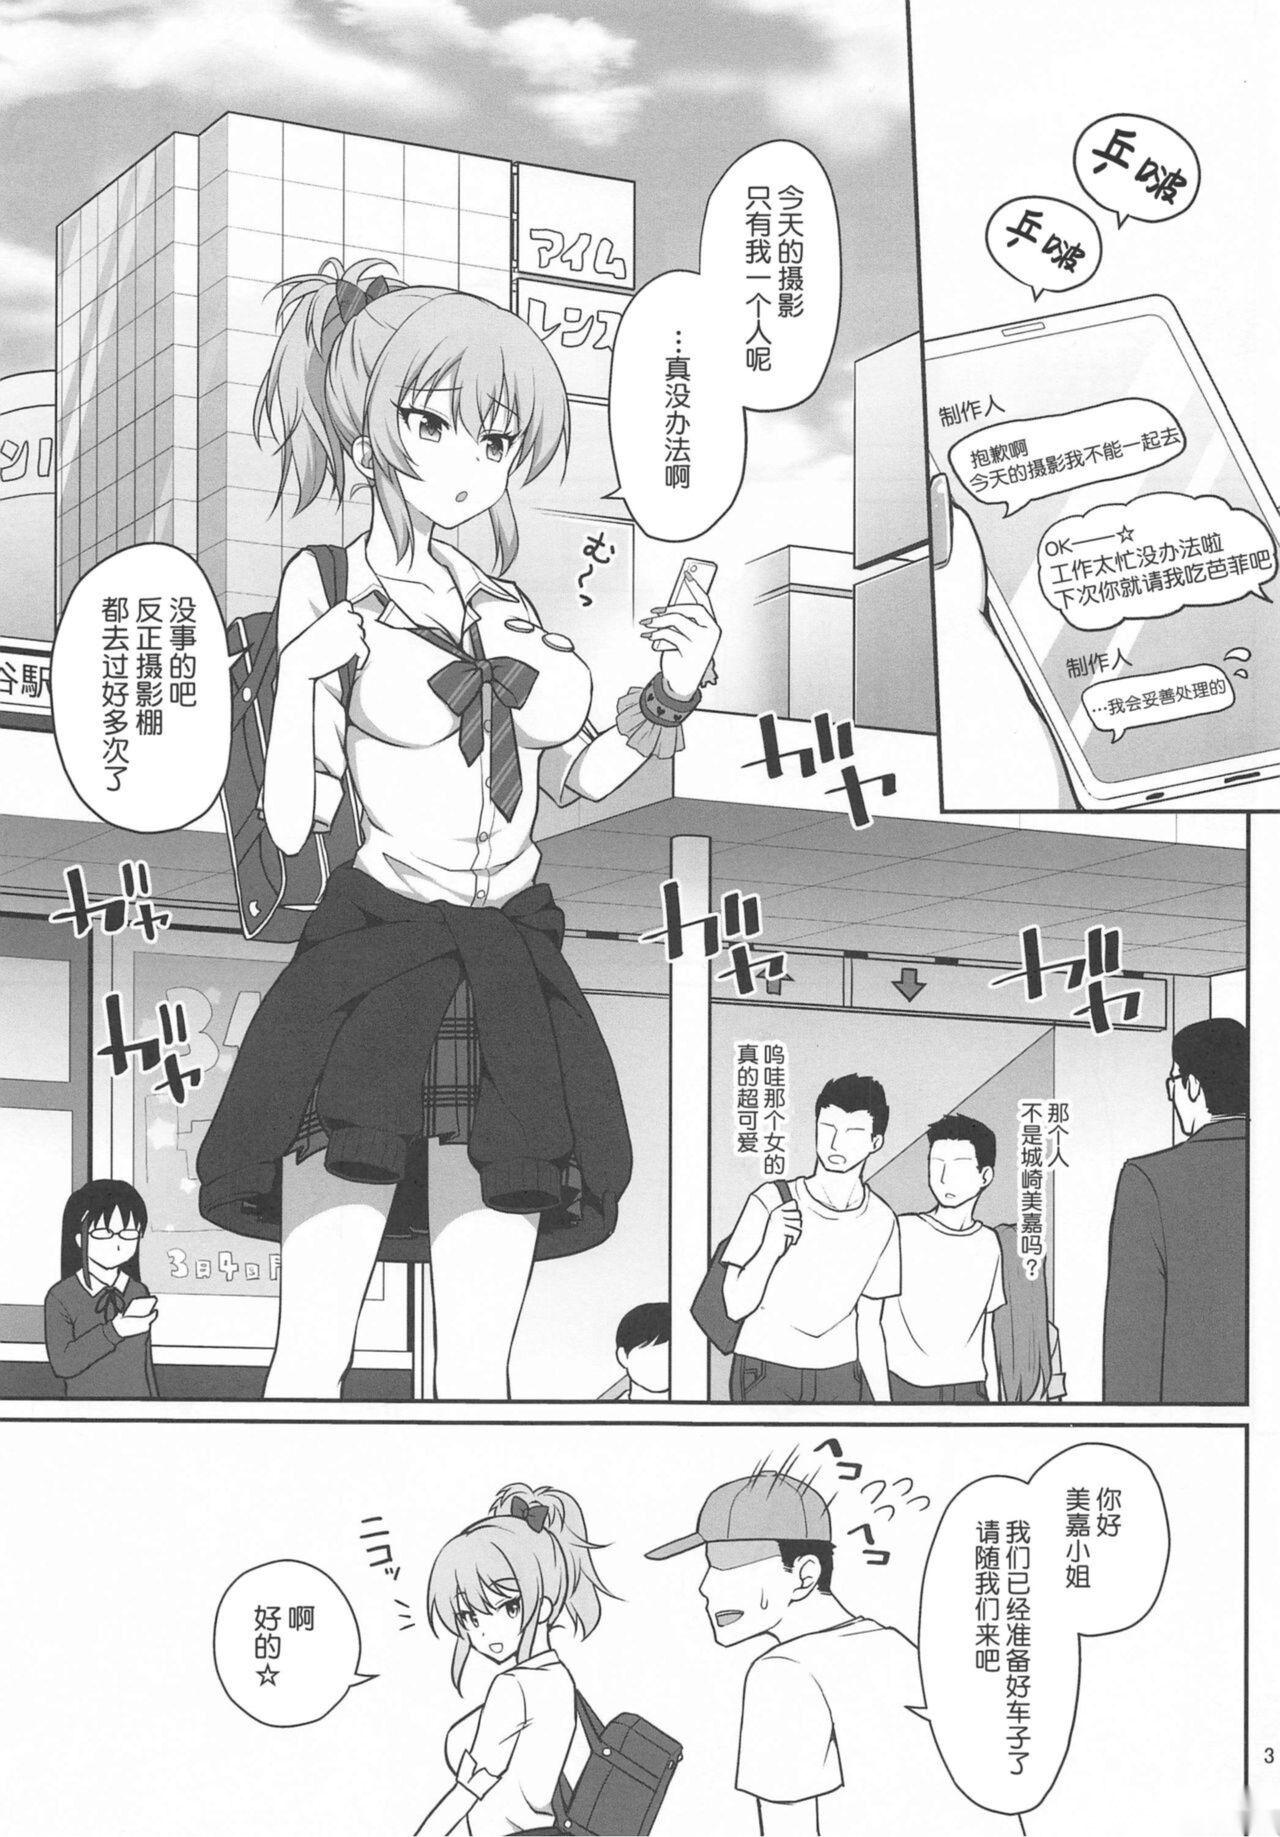 Ejaculation Kyousei Satsuei - The idolmaster Hot - Page 3